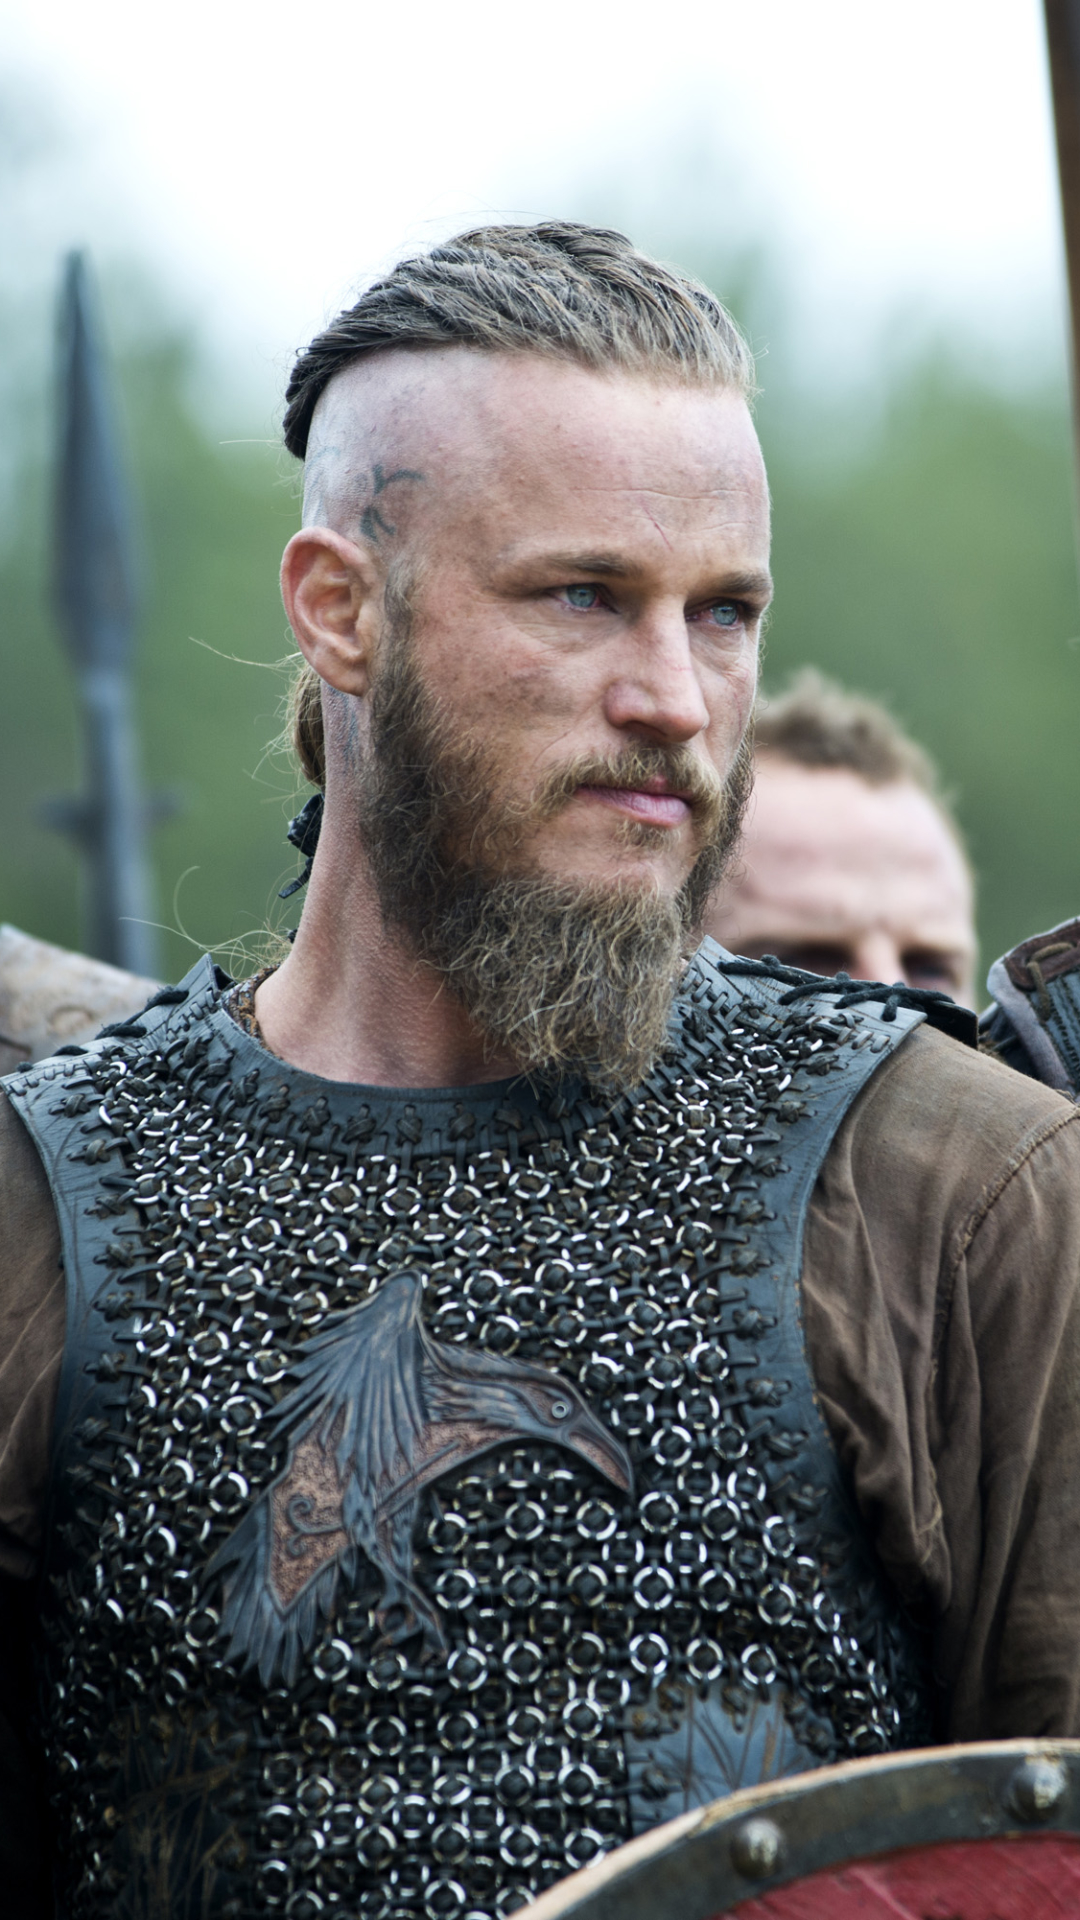 BaviPower United Kingdom - ✍️✍️Ragnar Lodbrok or Lothbrok was a legendary  Viking hero. This famous depiction of Ragnar hairstyle in the TV series  “Vikings” is a growing long hair with a beard.